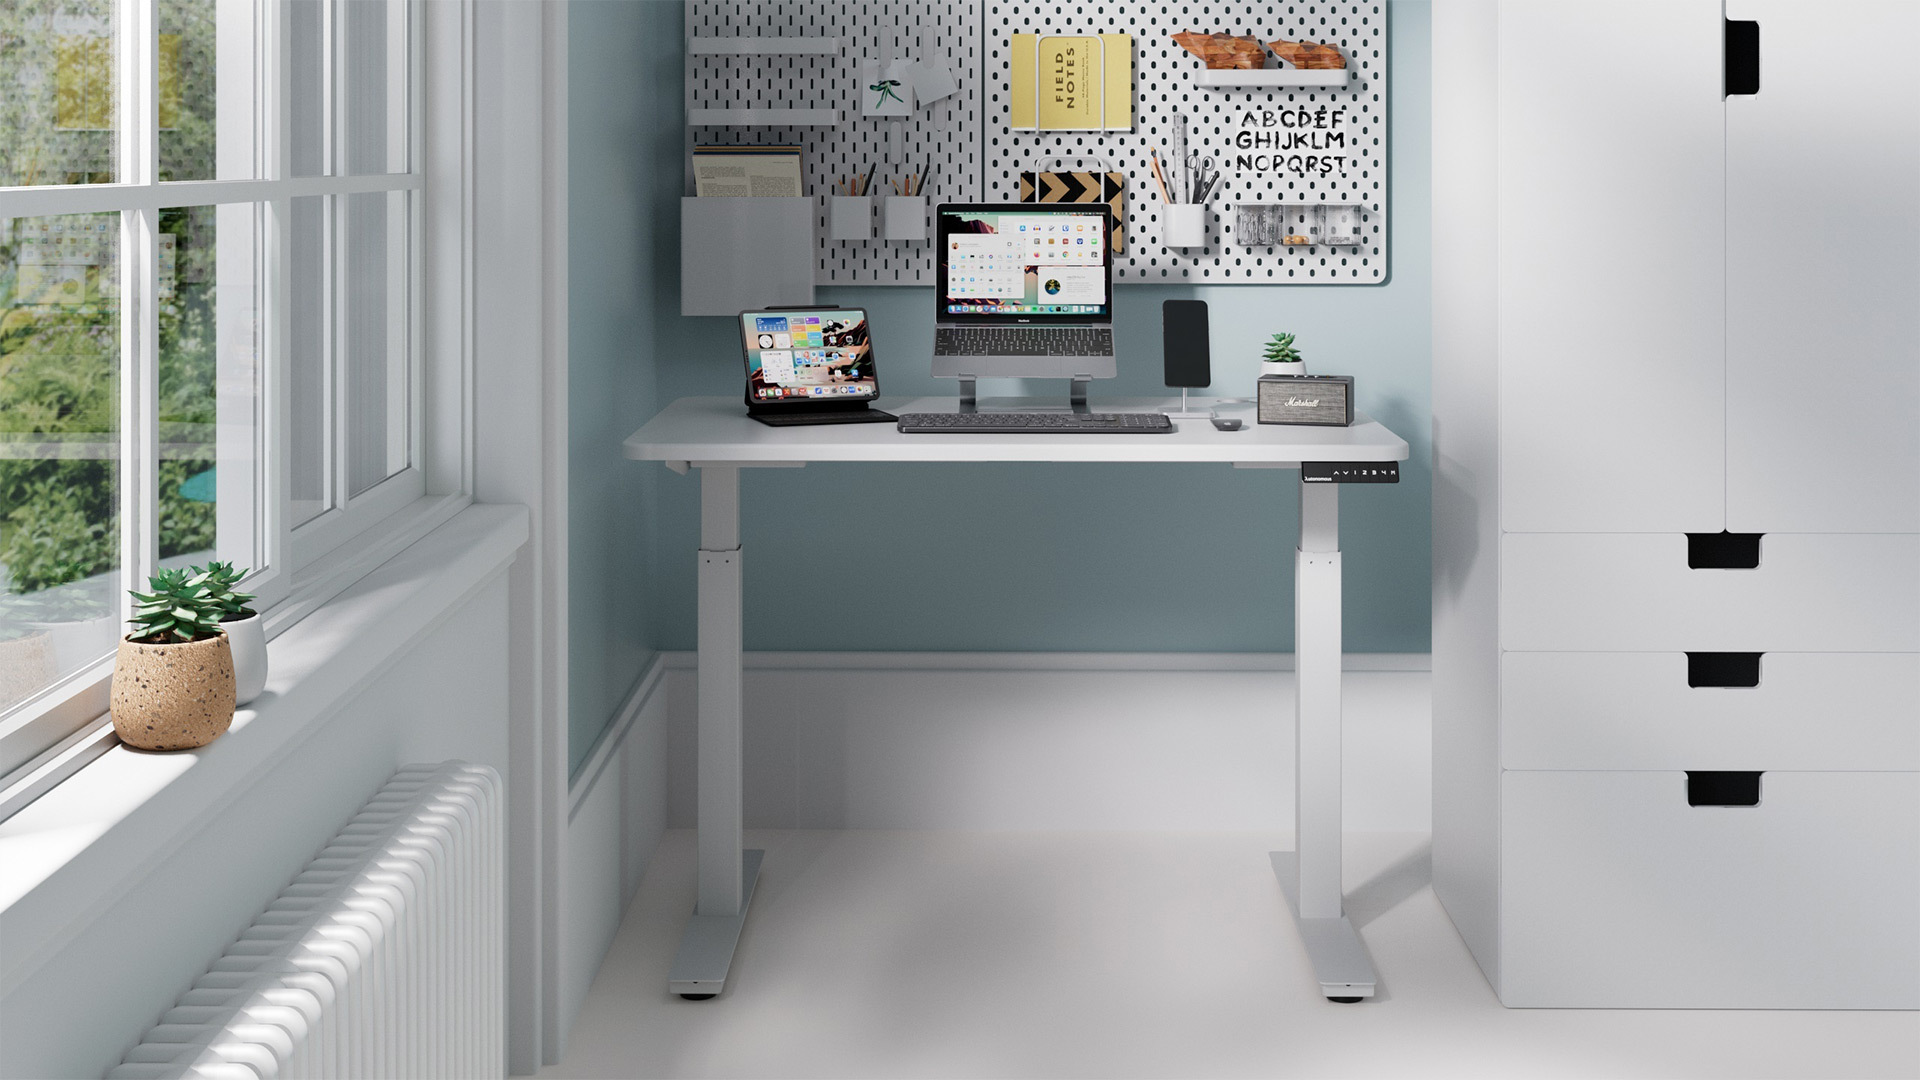 An efficient workspace for those with limited space or who frequently move their Mac and PC desk setup